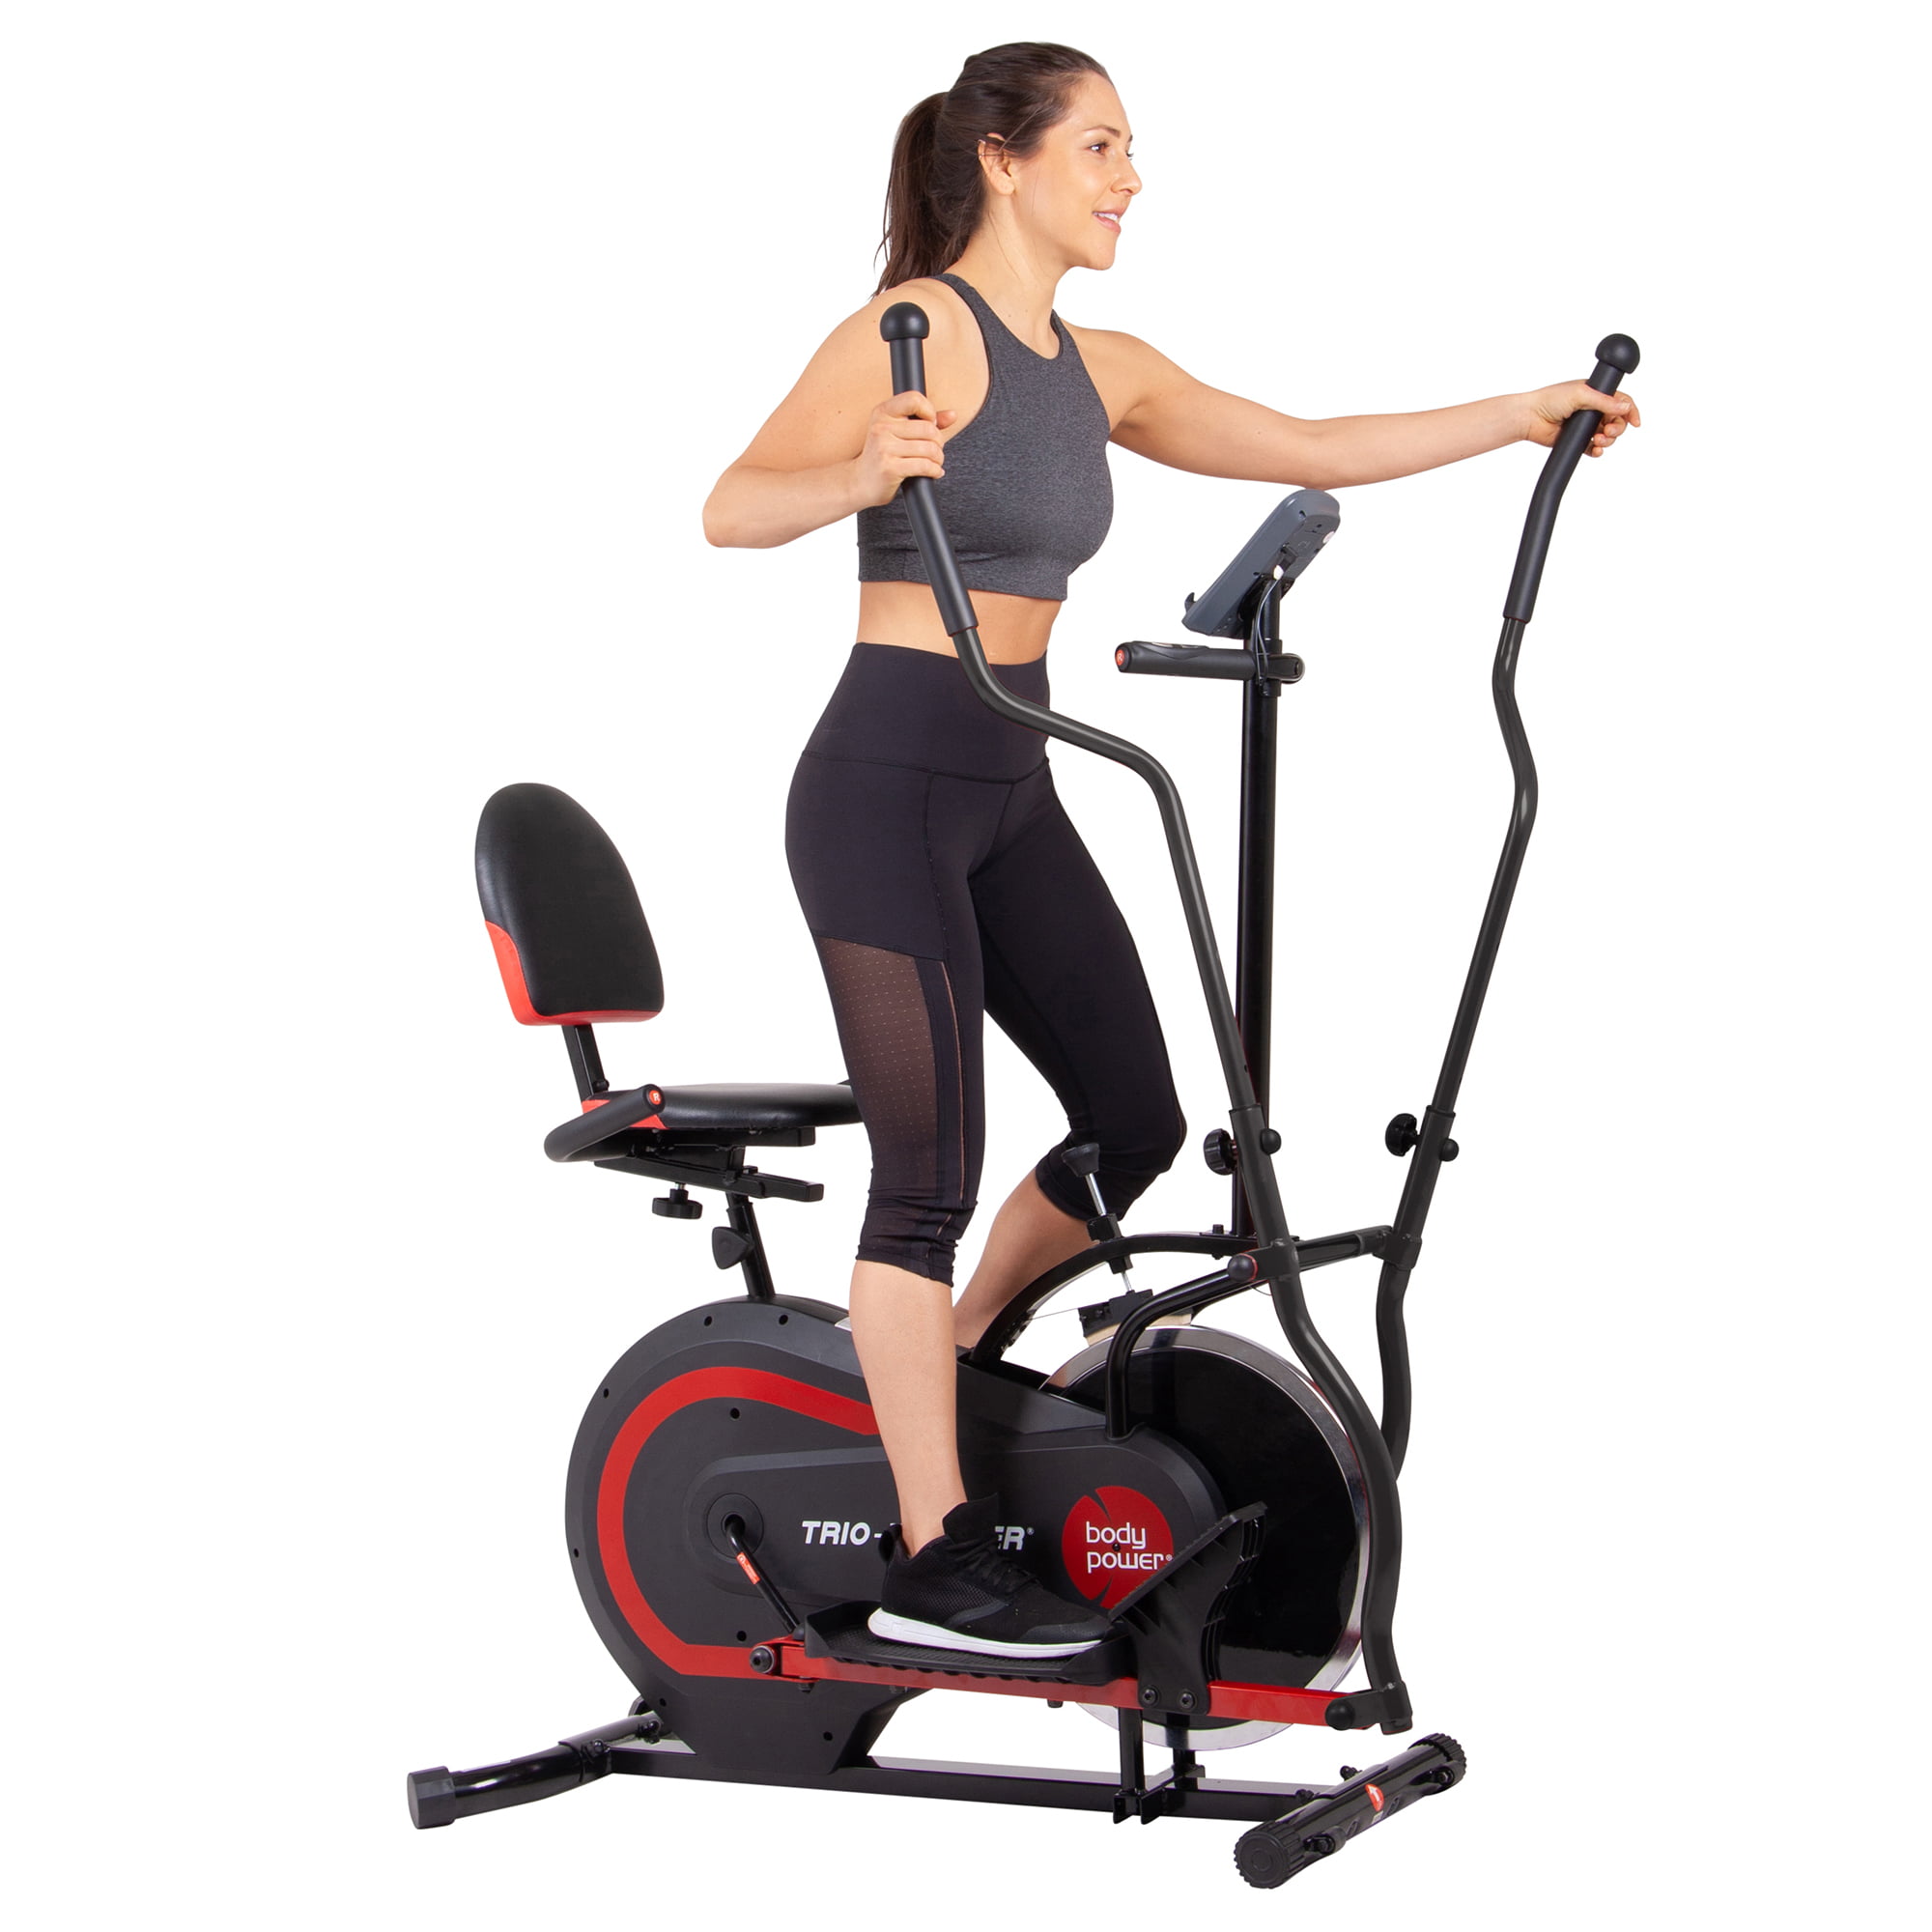 Indoor Sports Trainer Exercise Bike Equipment Home Gym Workout Fitness Machine B